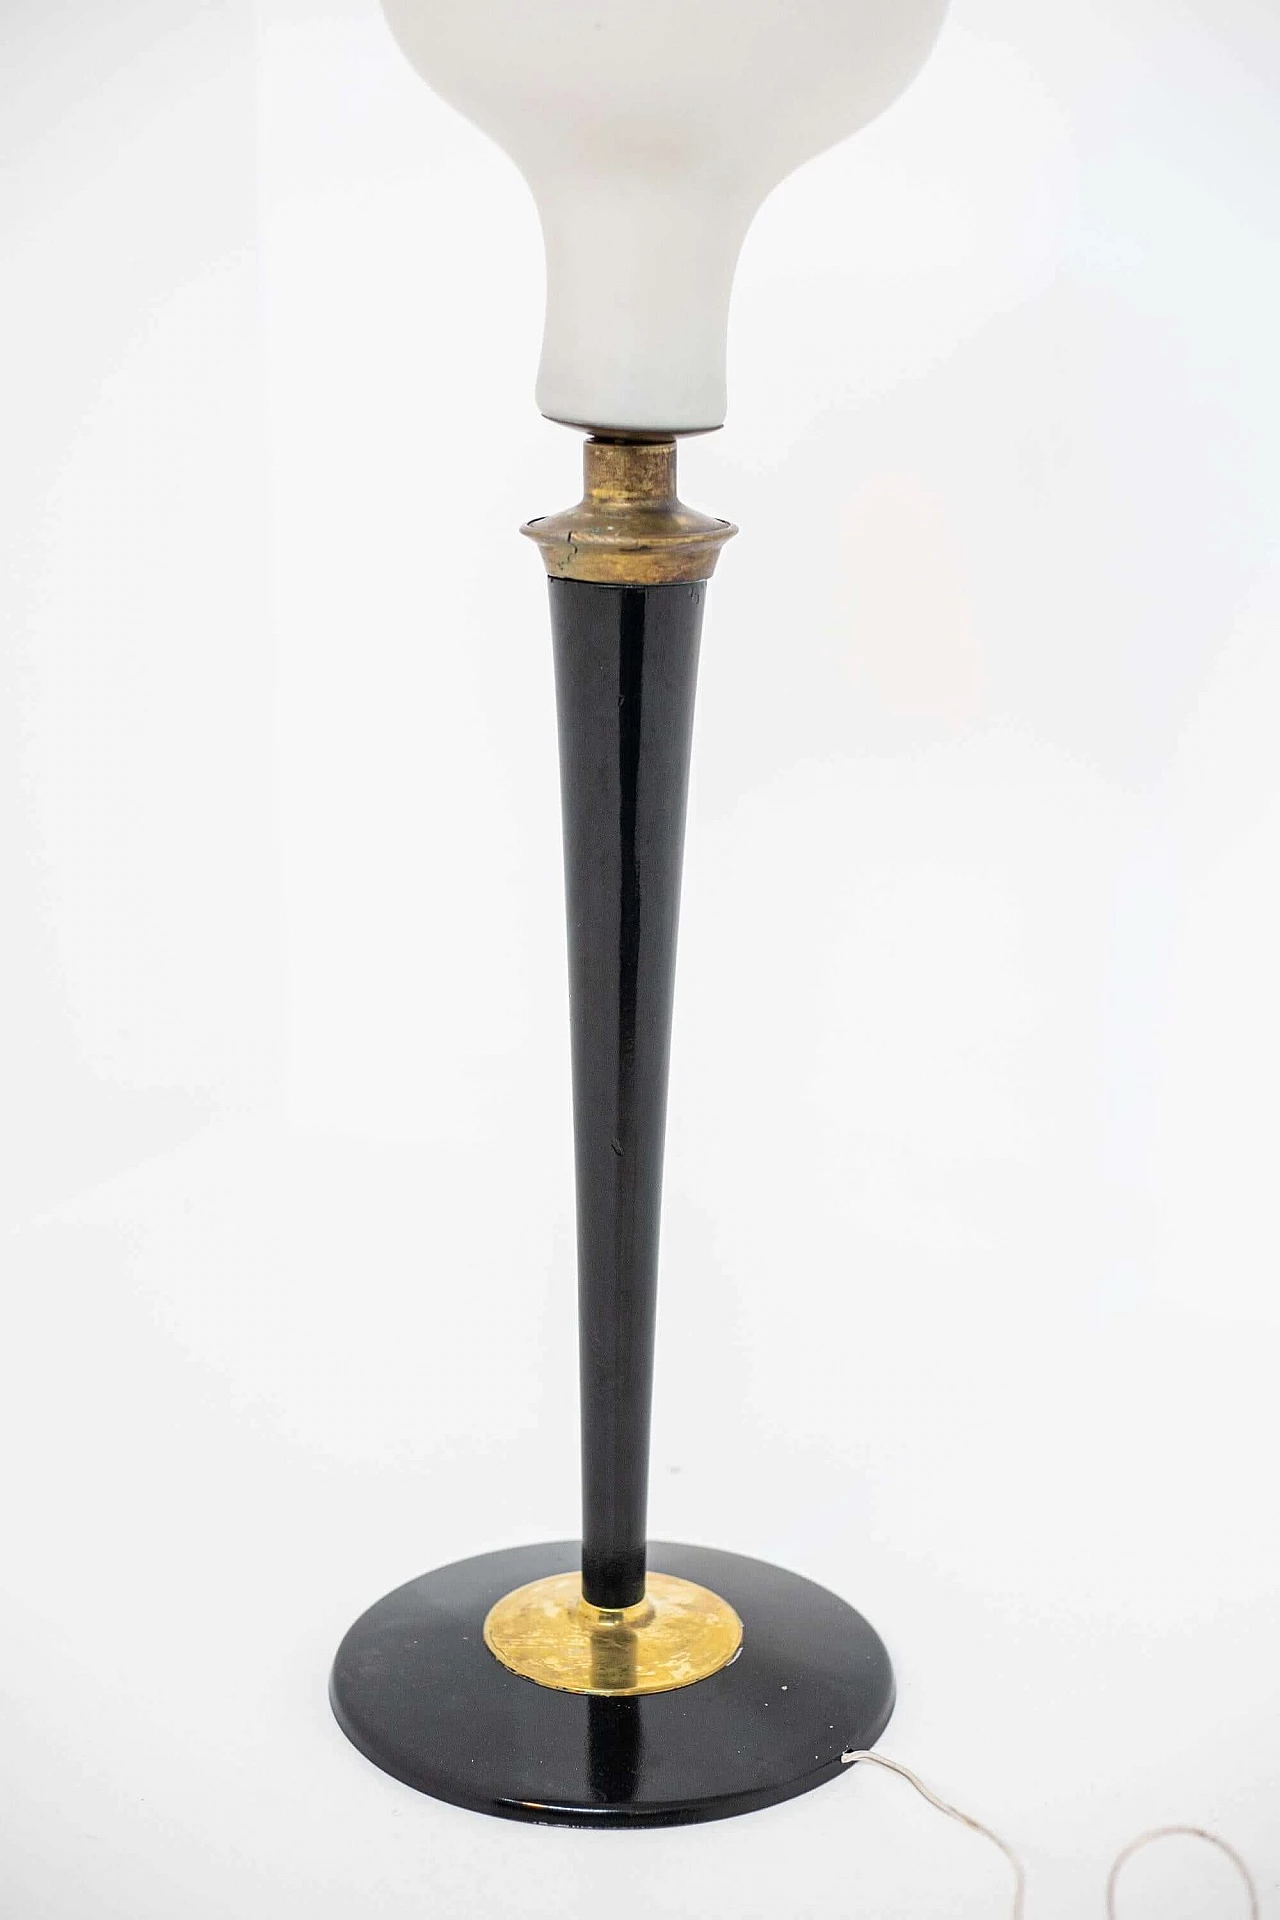 Opal glass table lamp with wood and brass frame, 1950s 1400586